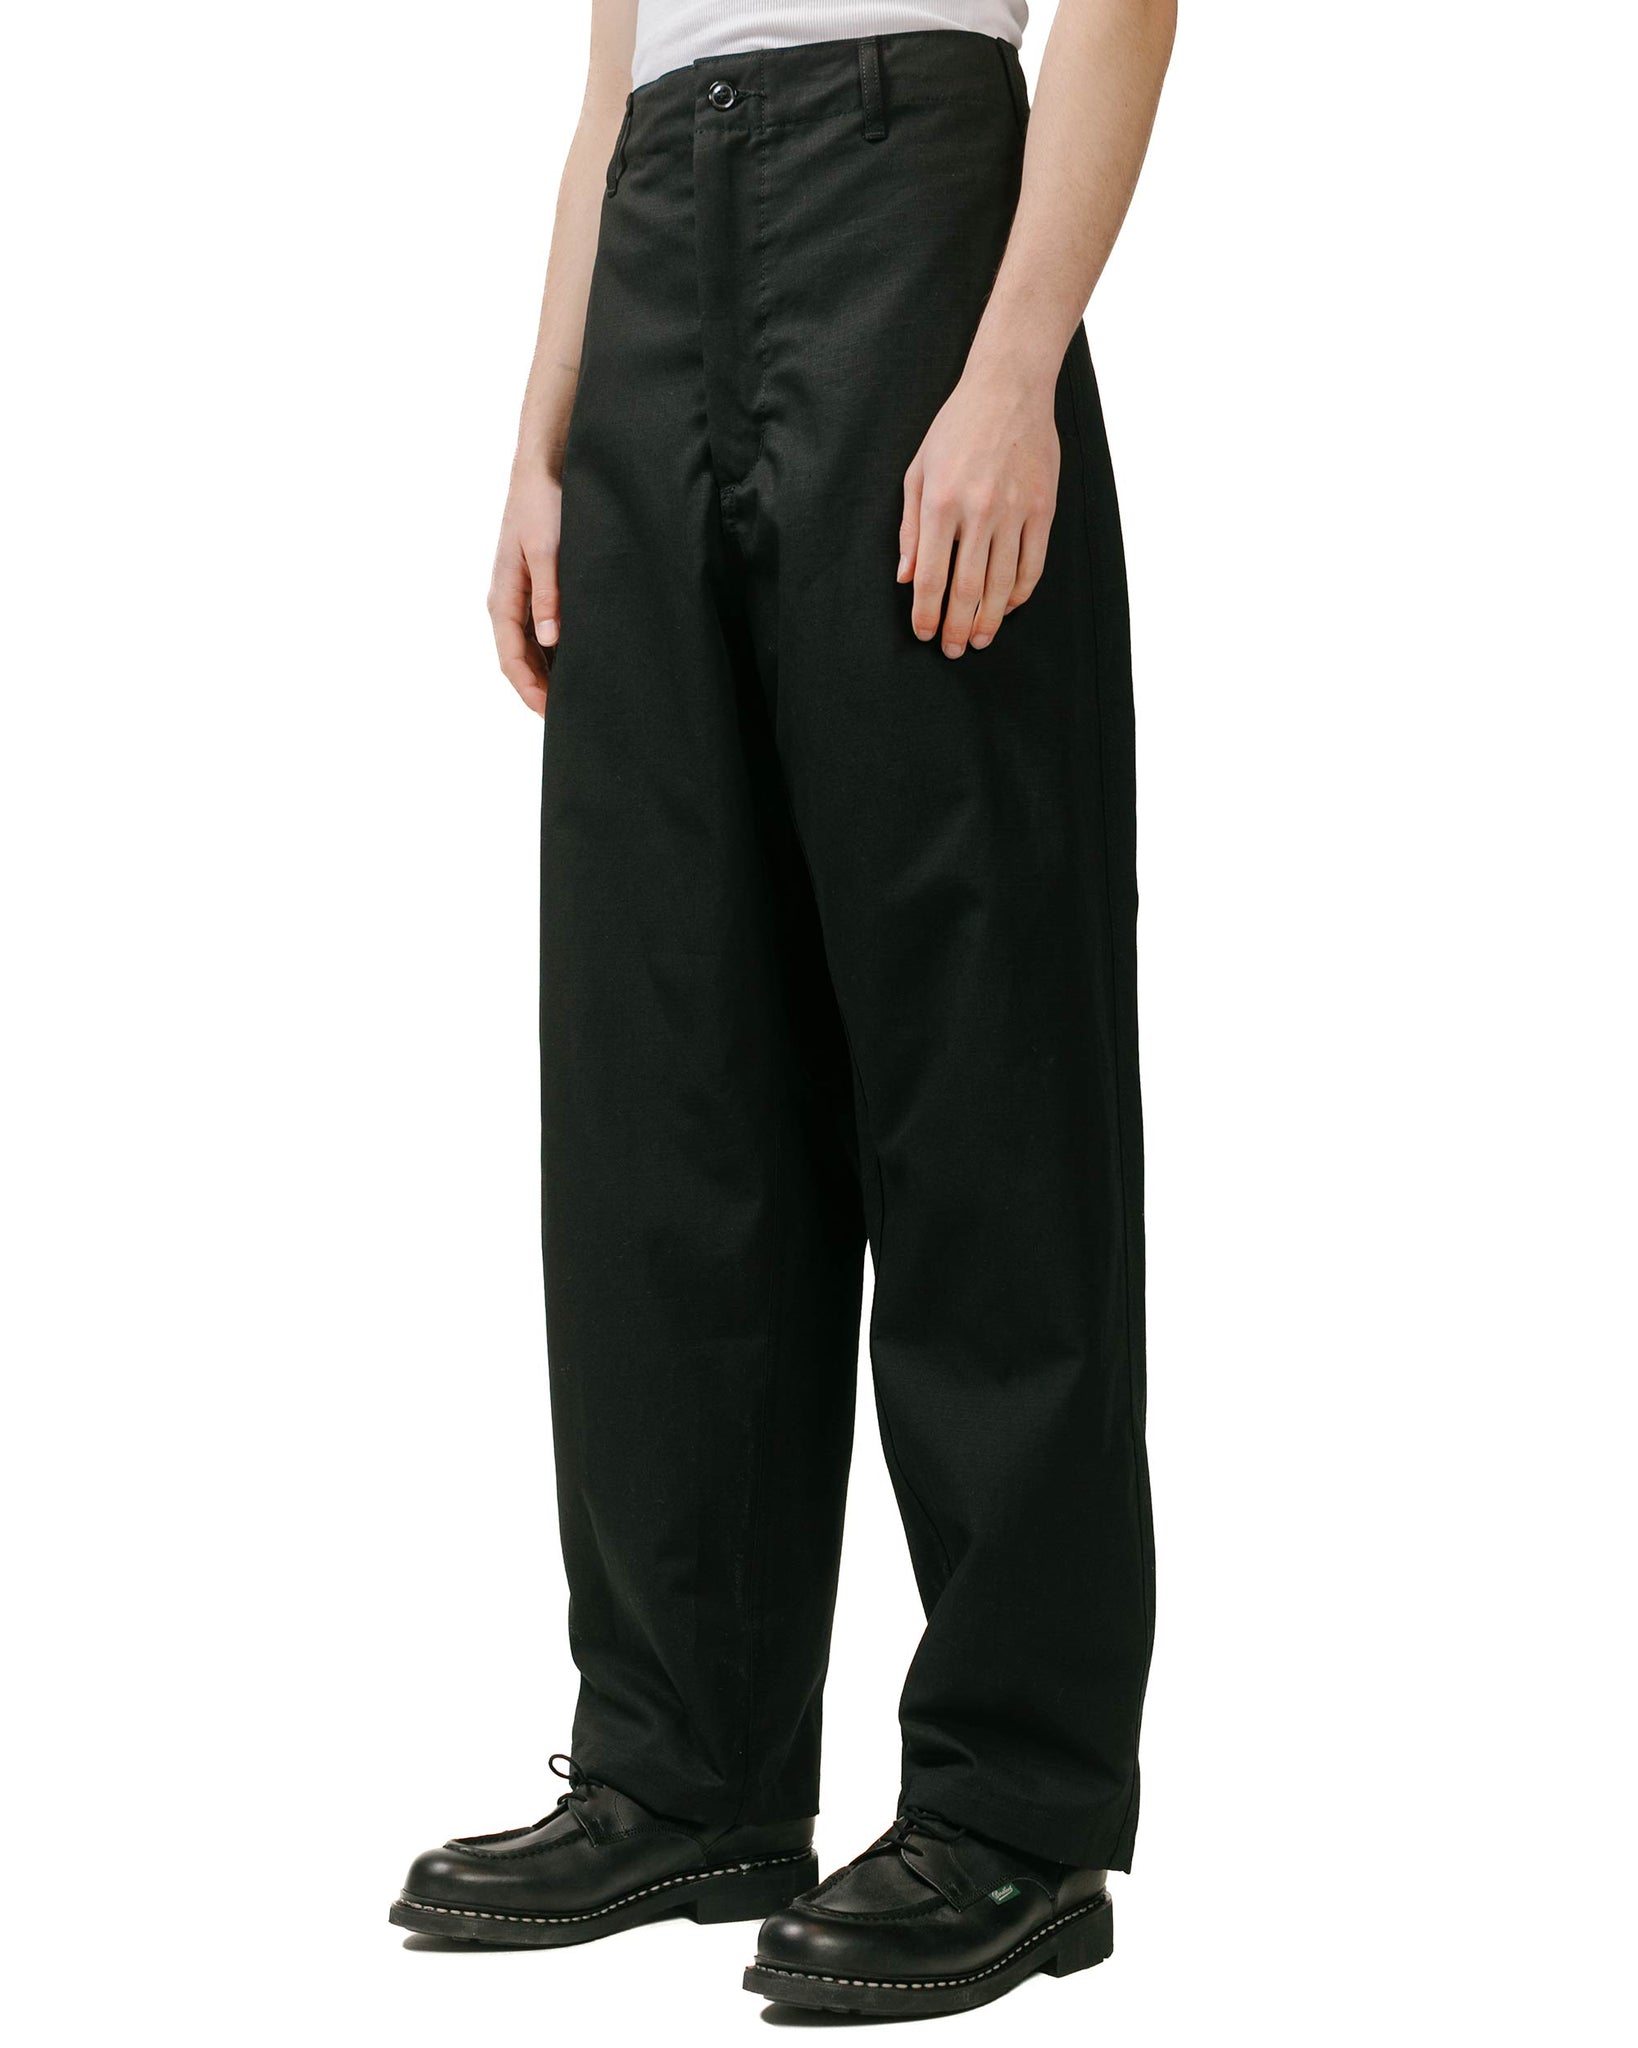 Engineered Garments Workaday Utility Pant Black Cotton Ripstop model front